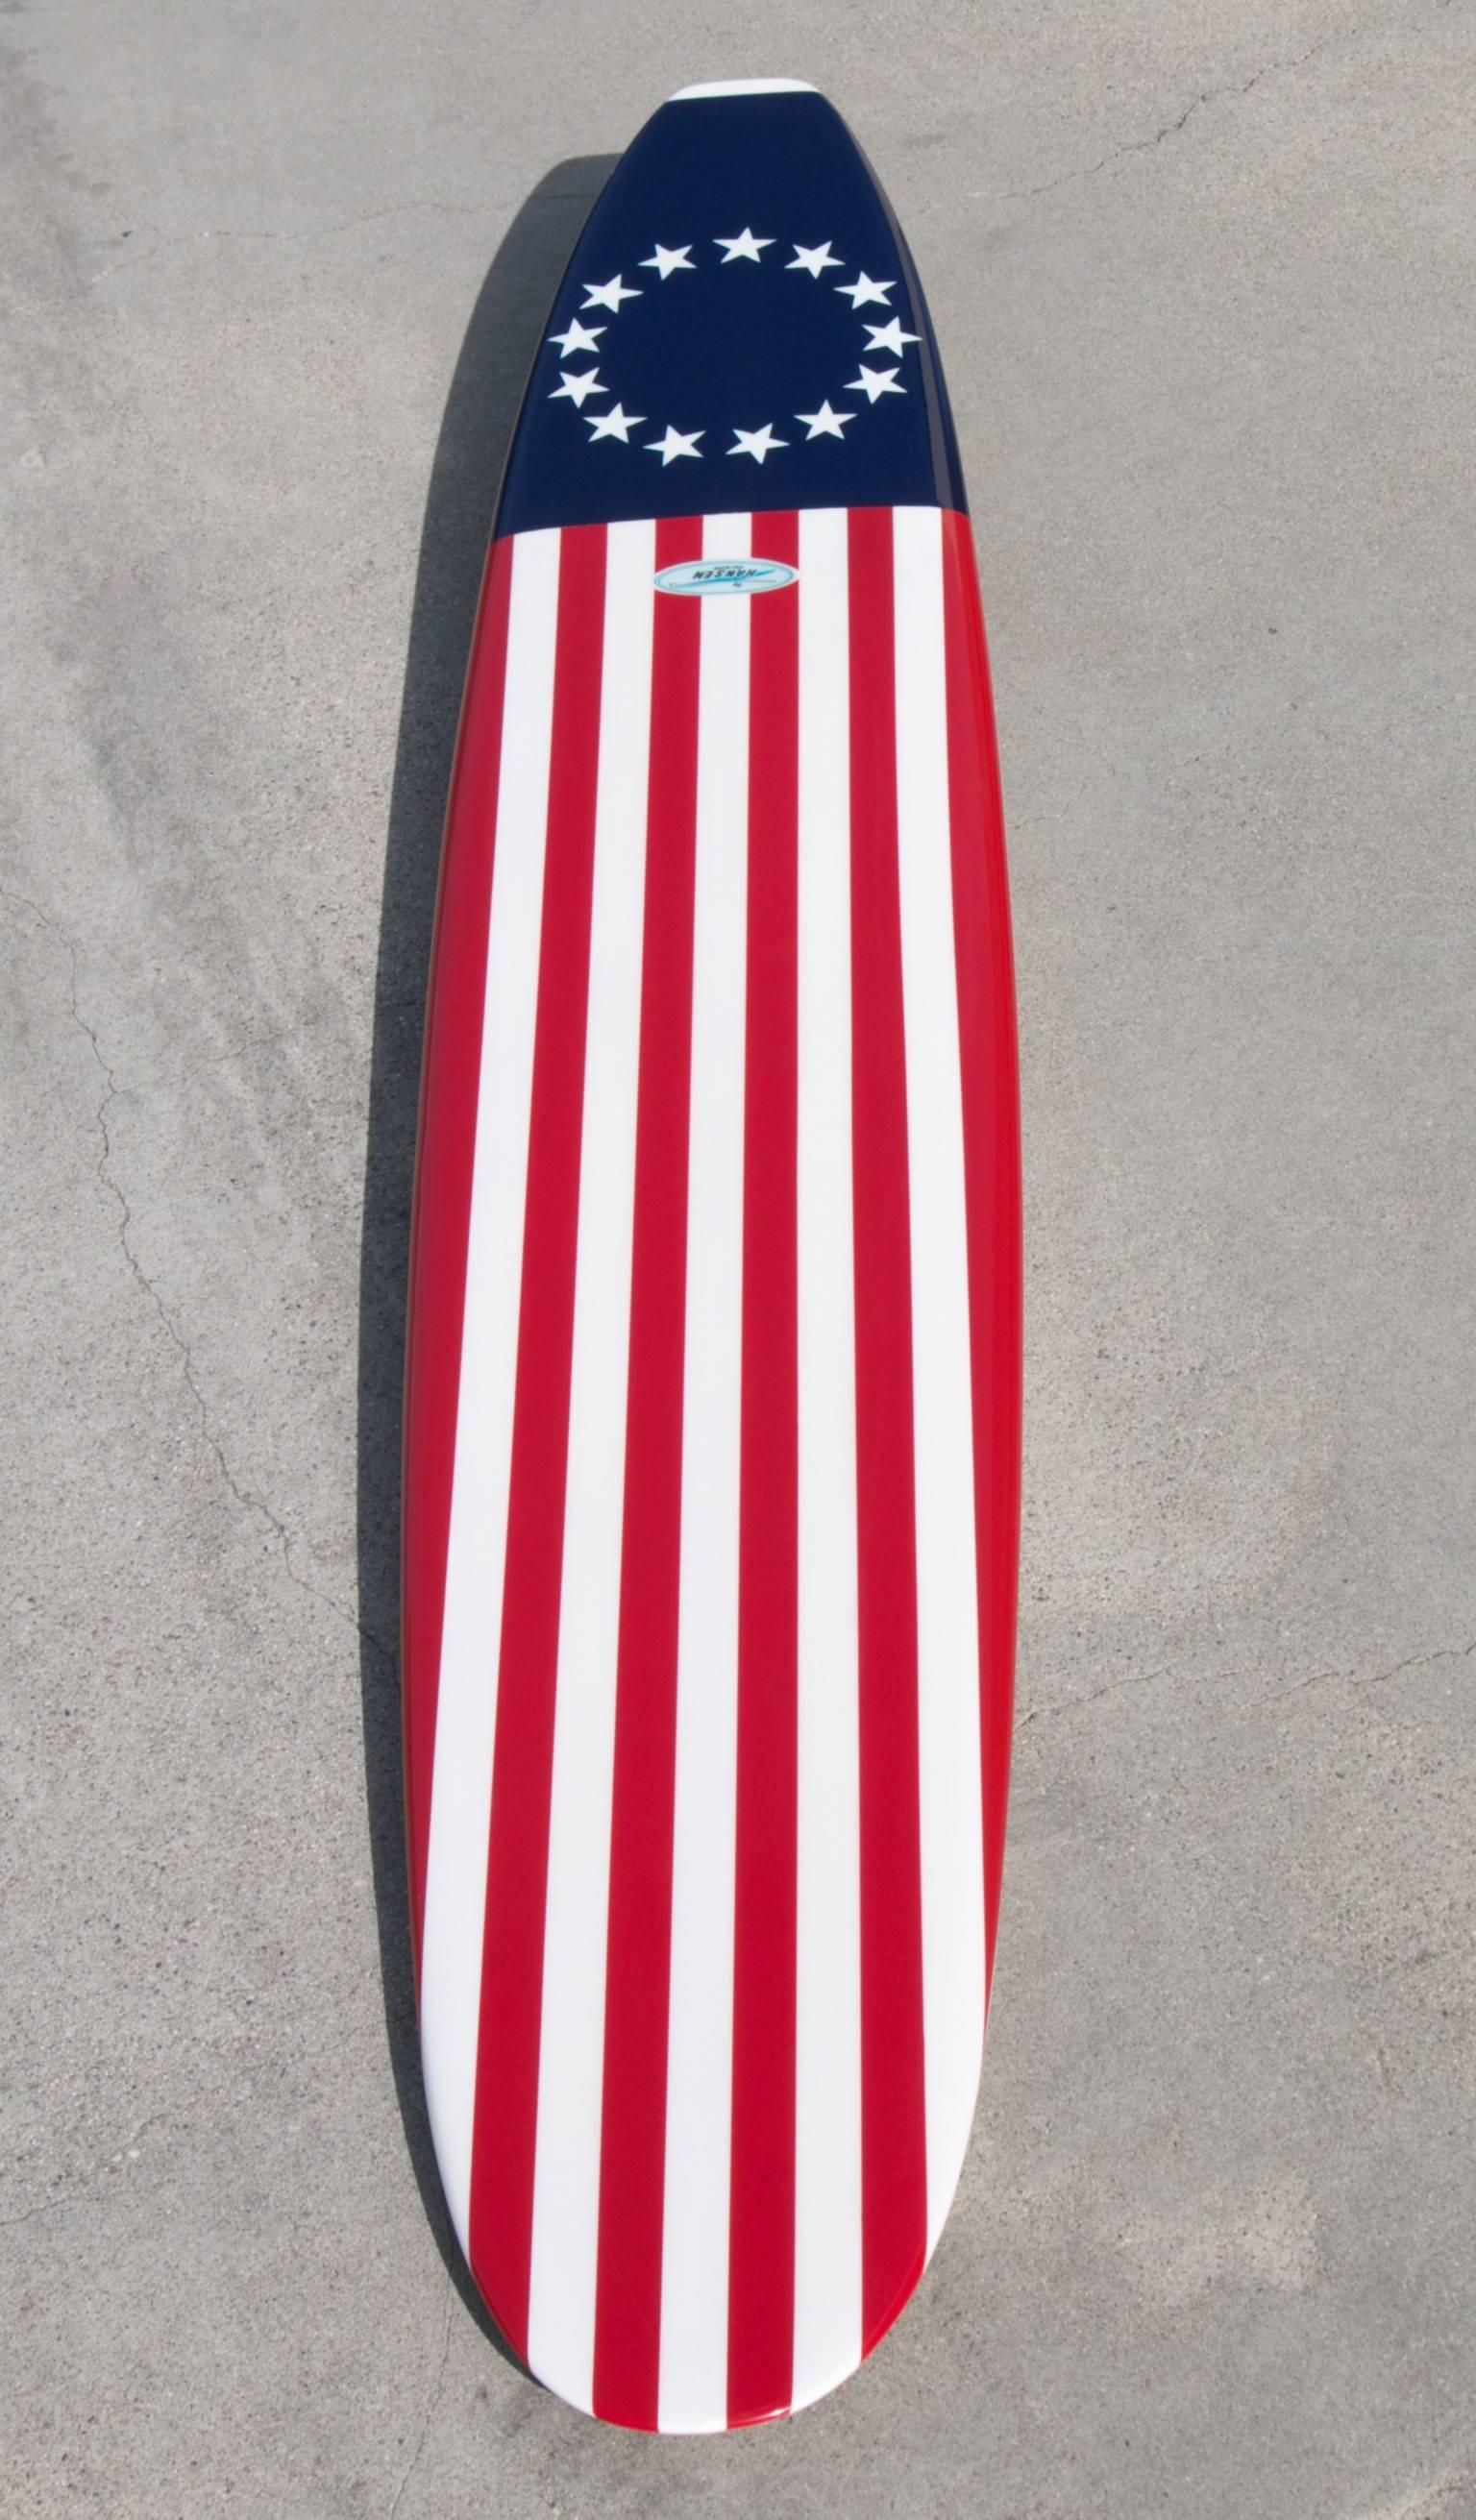 Mid-Century Modern Stars and Stripes, American Navy Flag Surfboard by Hanson, c 1962 Fully Restored